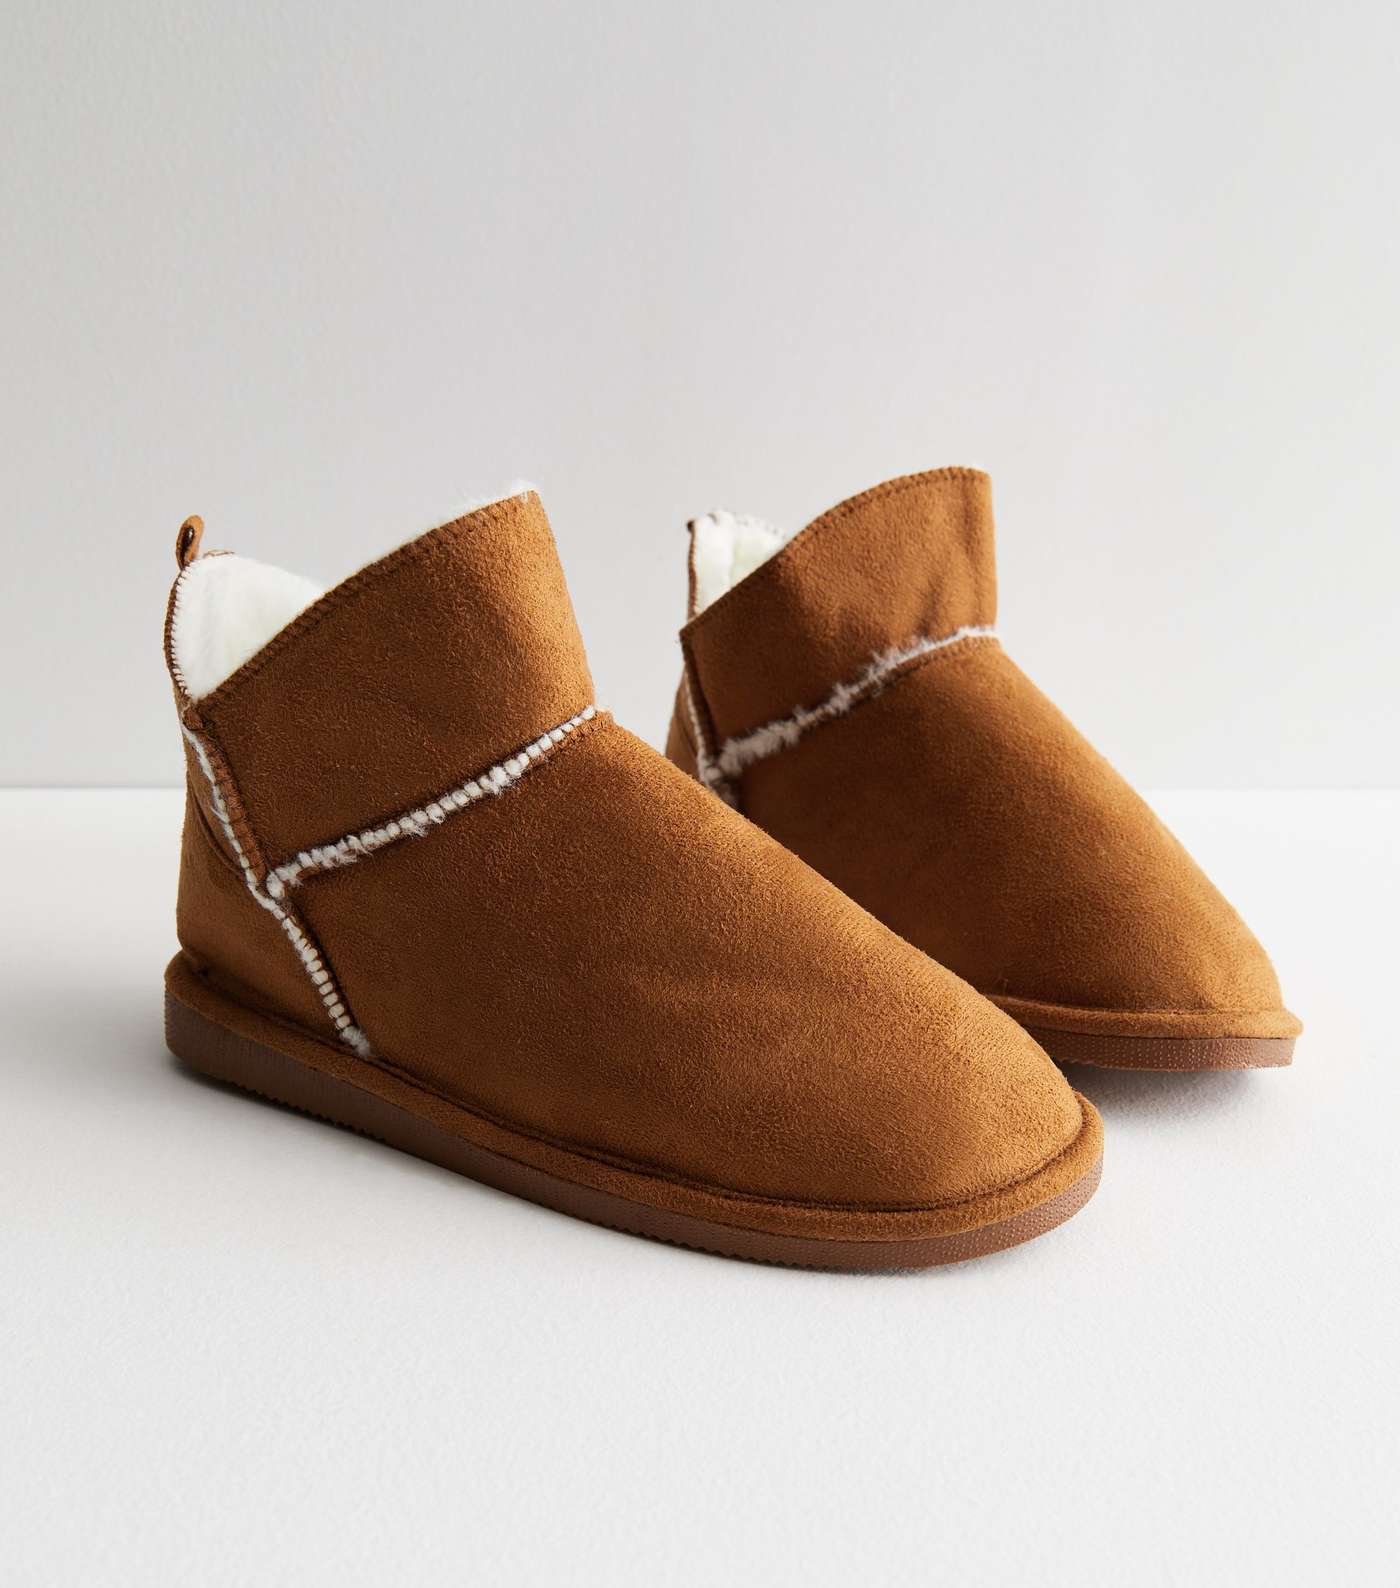 Loungeable Tan Faux Fur Lined Slipper Boots